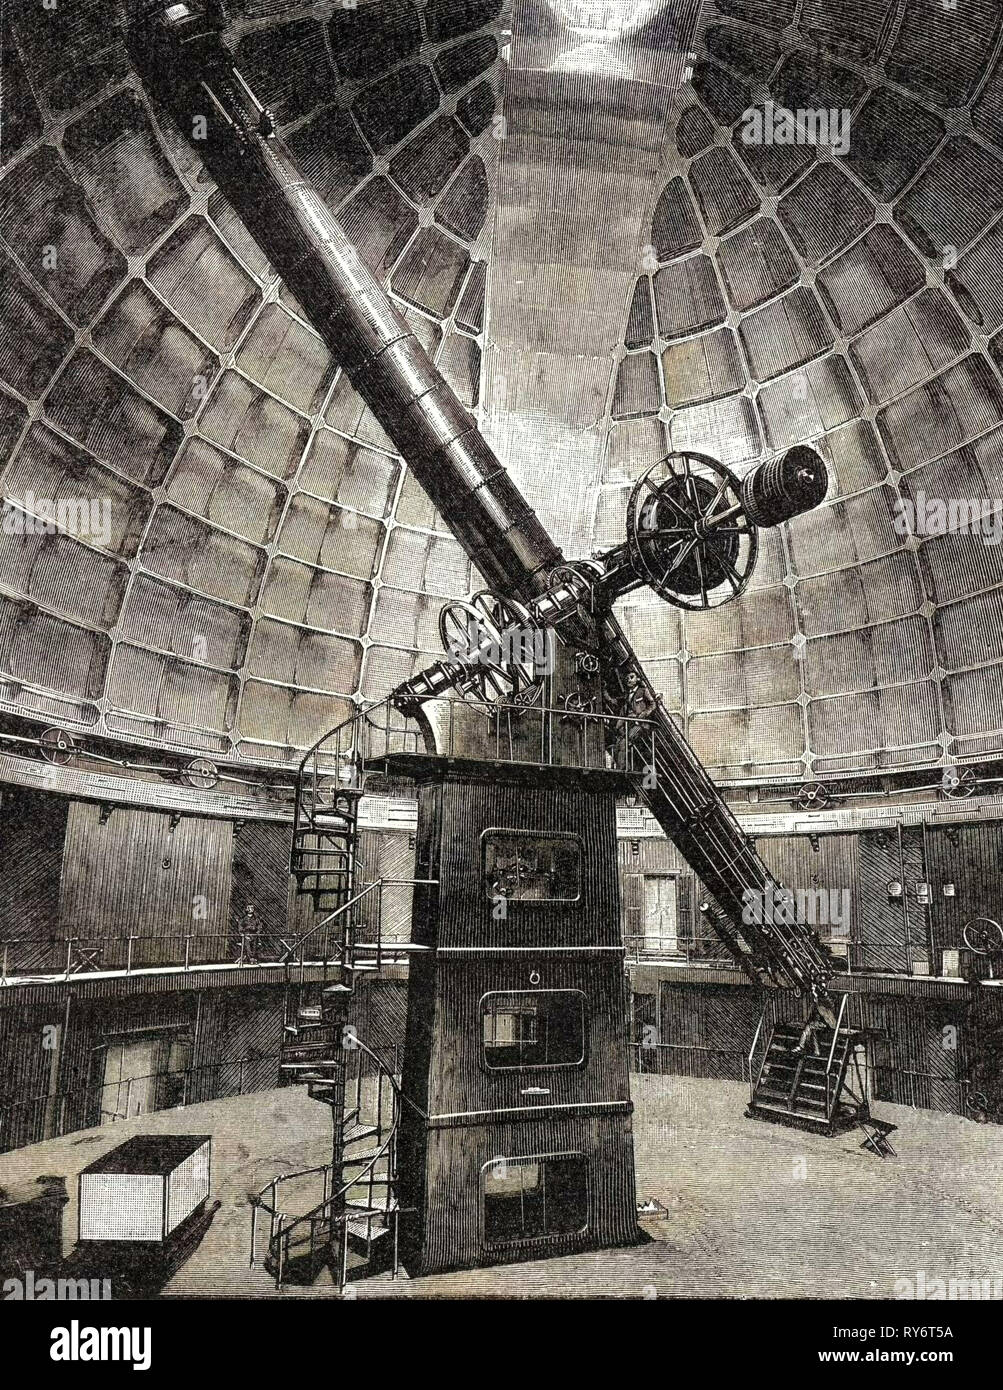 California the Largest Telescope in the World 1891 USA Stock Photo - Alamy